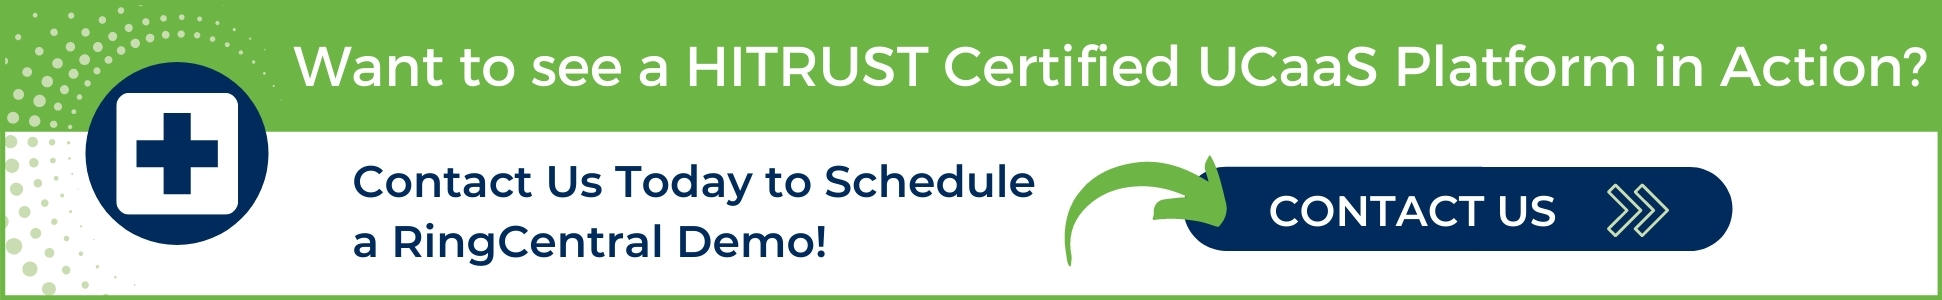 Want to see a HITRUST Certified UCaaS Platform in Action?